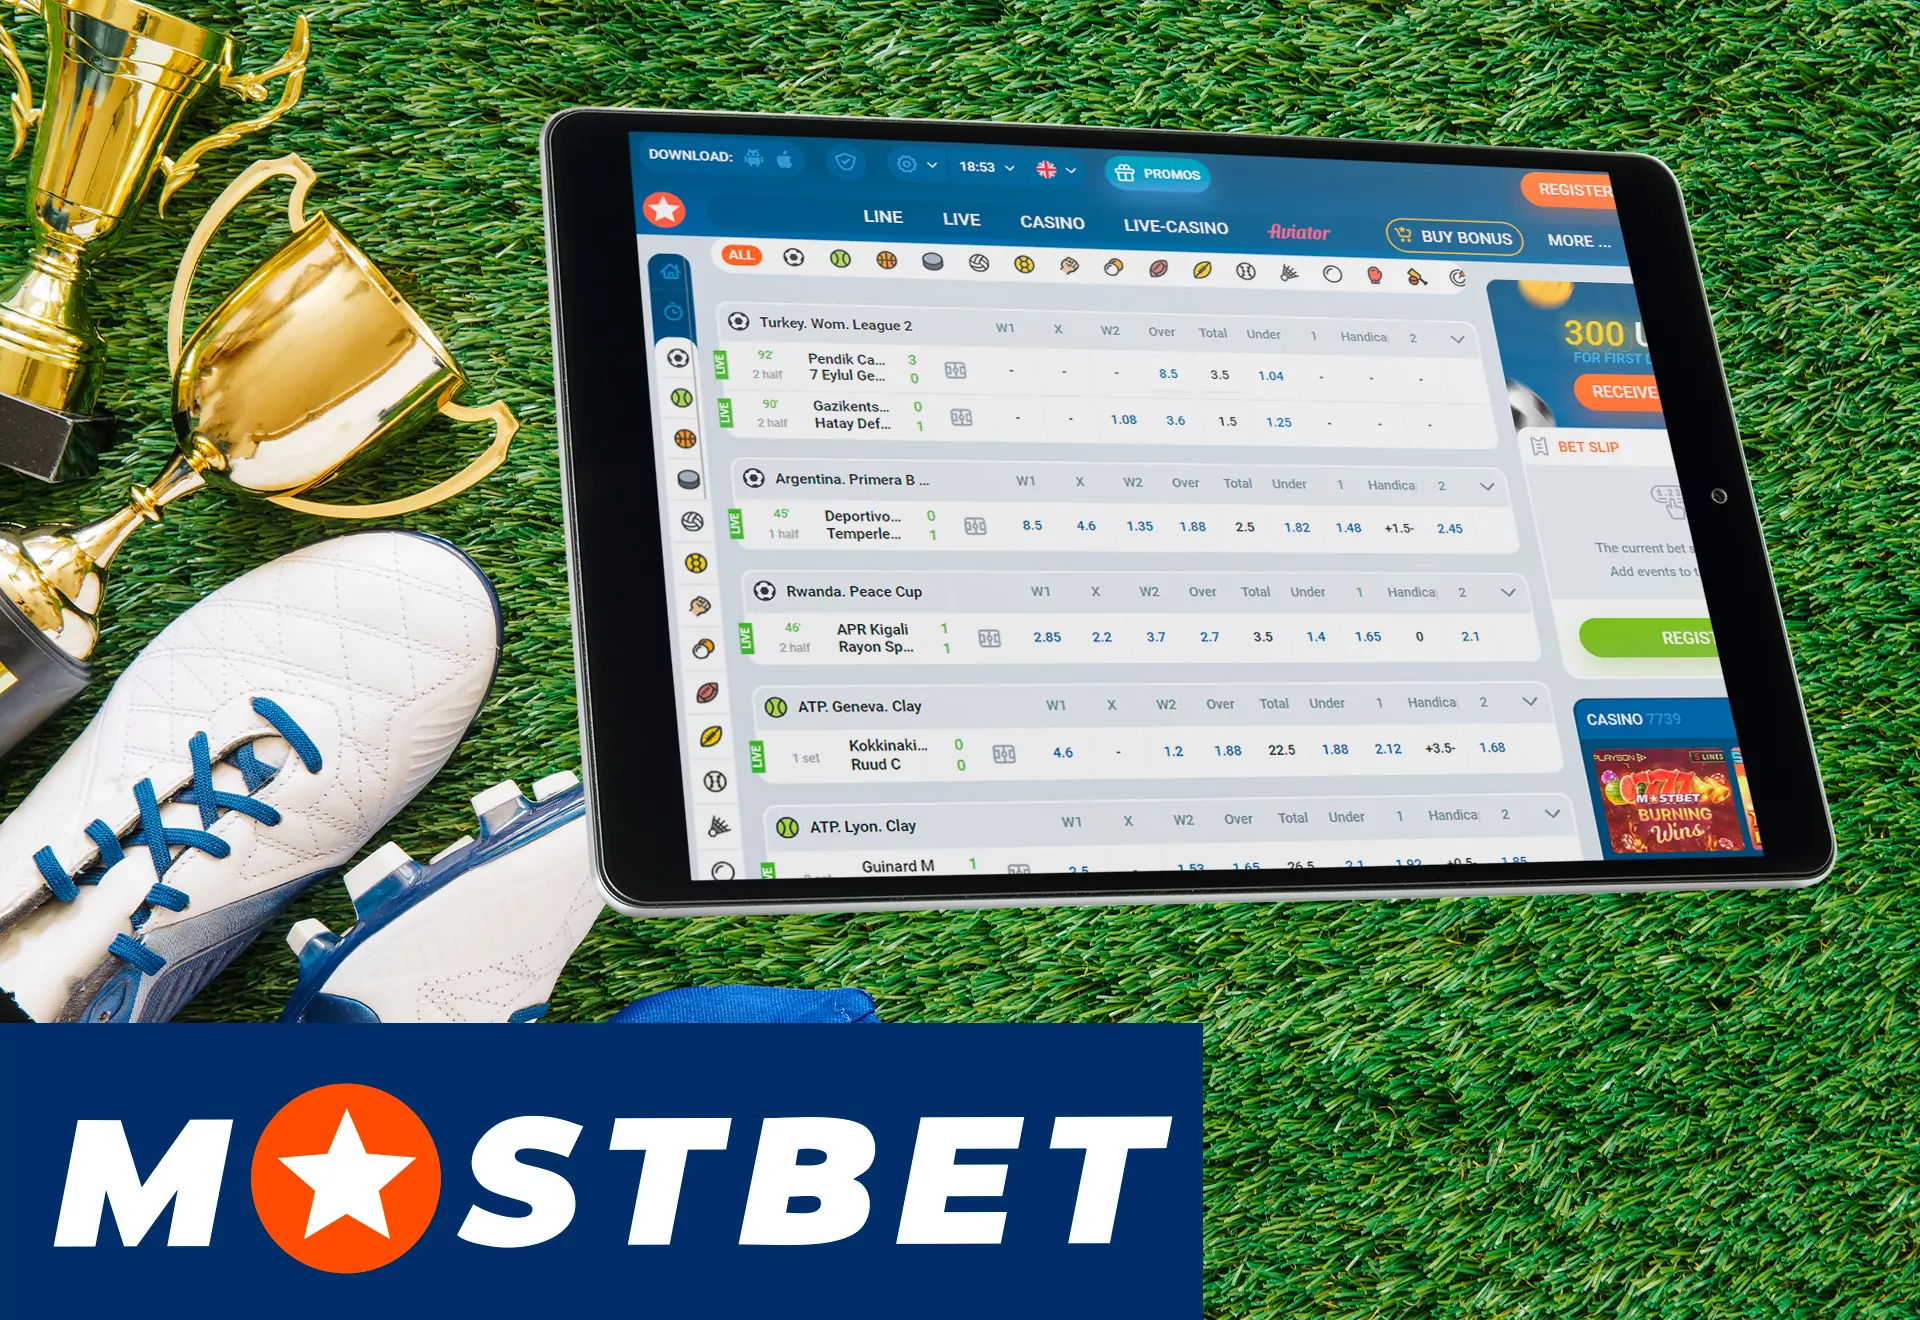 Mostbet App allows you to place cricket bets from anywhere.